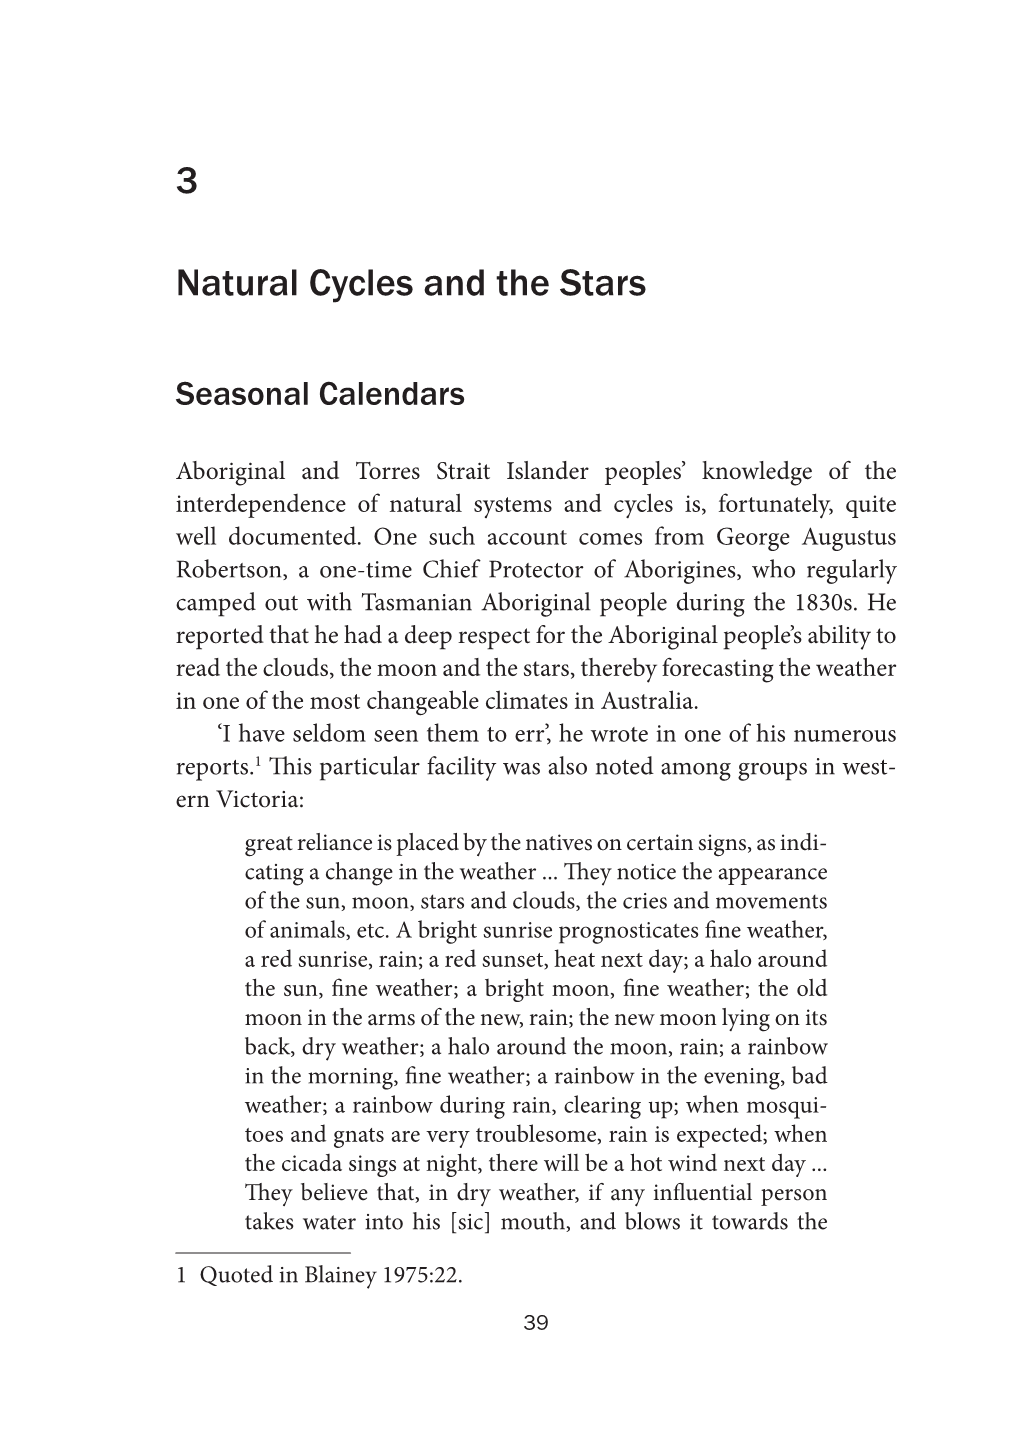 3 Natural Cycles and the Stars